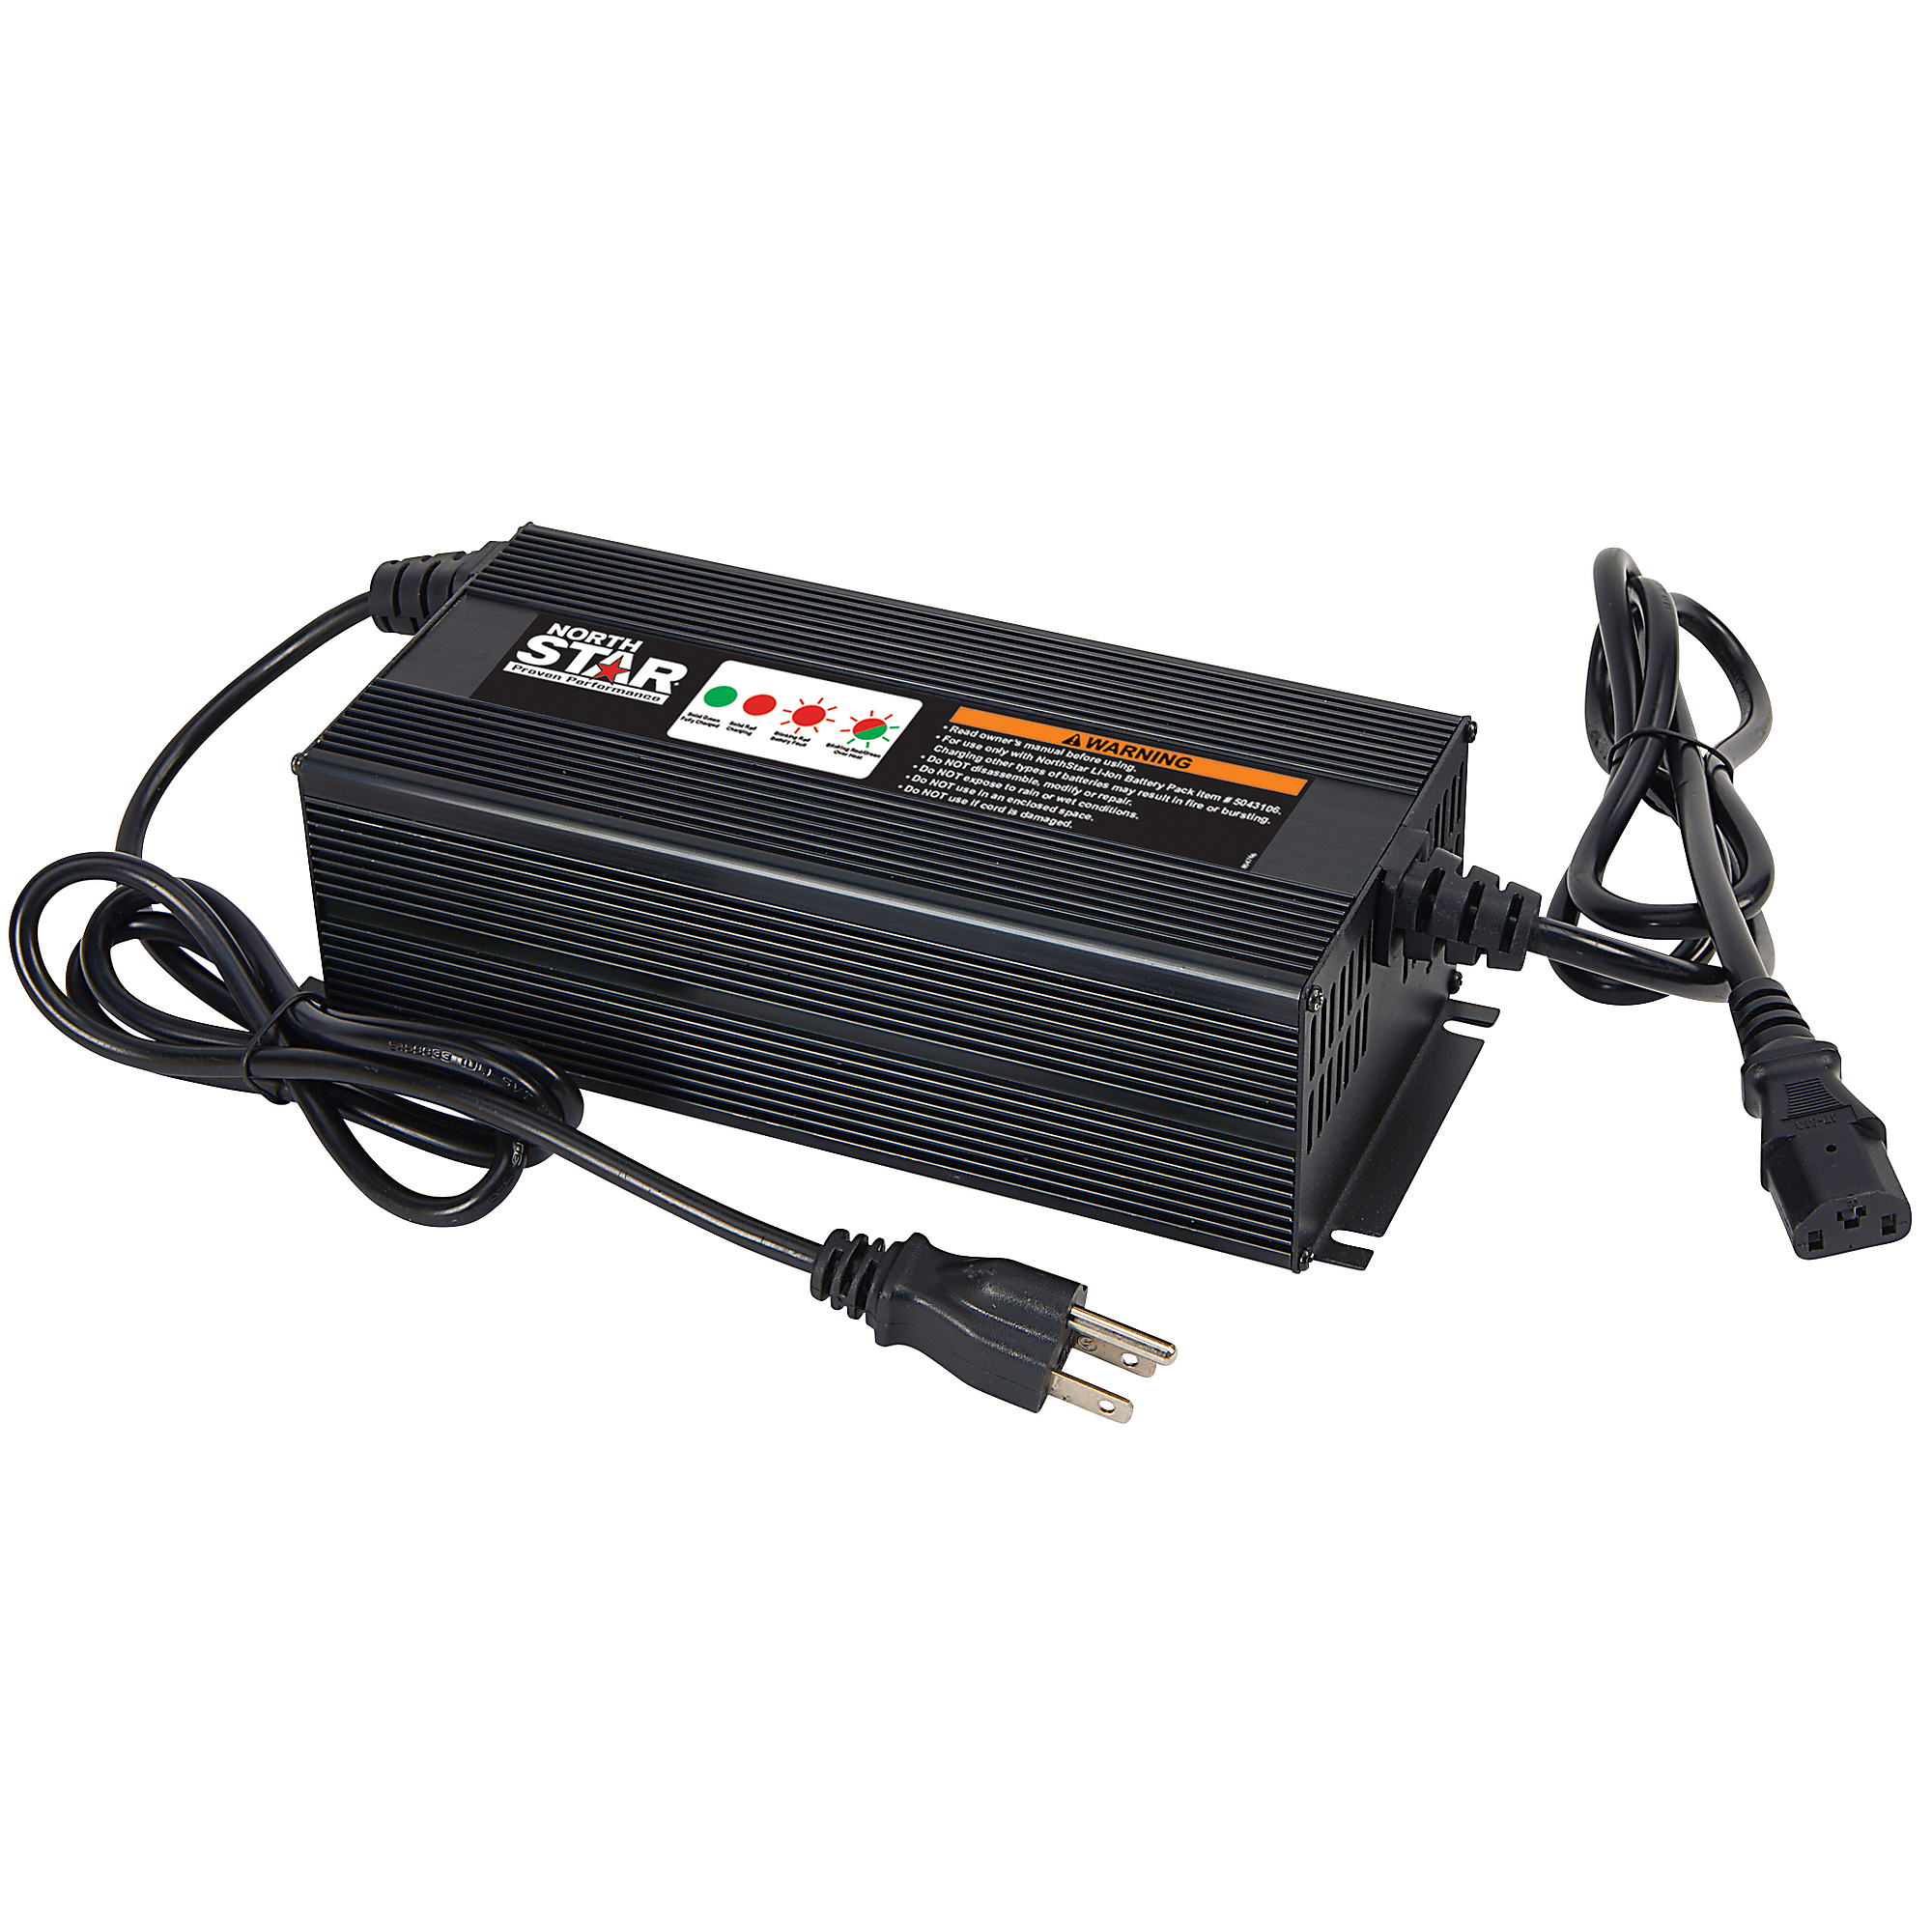 NorthStar 8 Amp Battery Charger